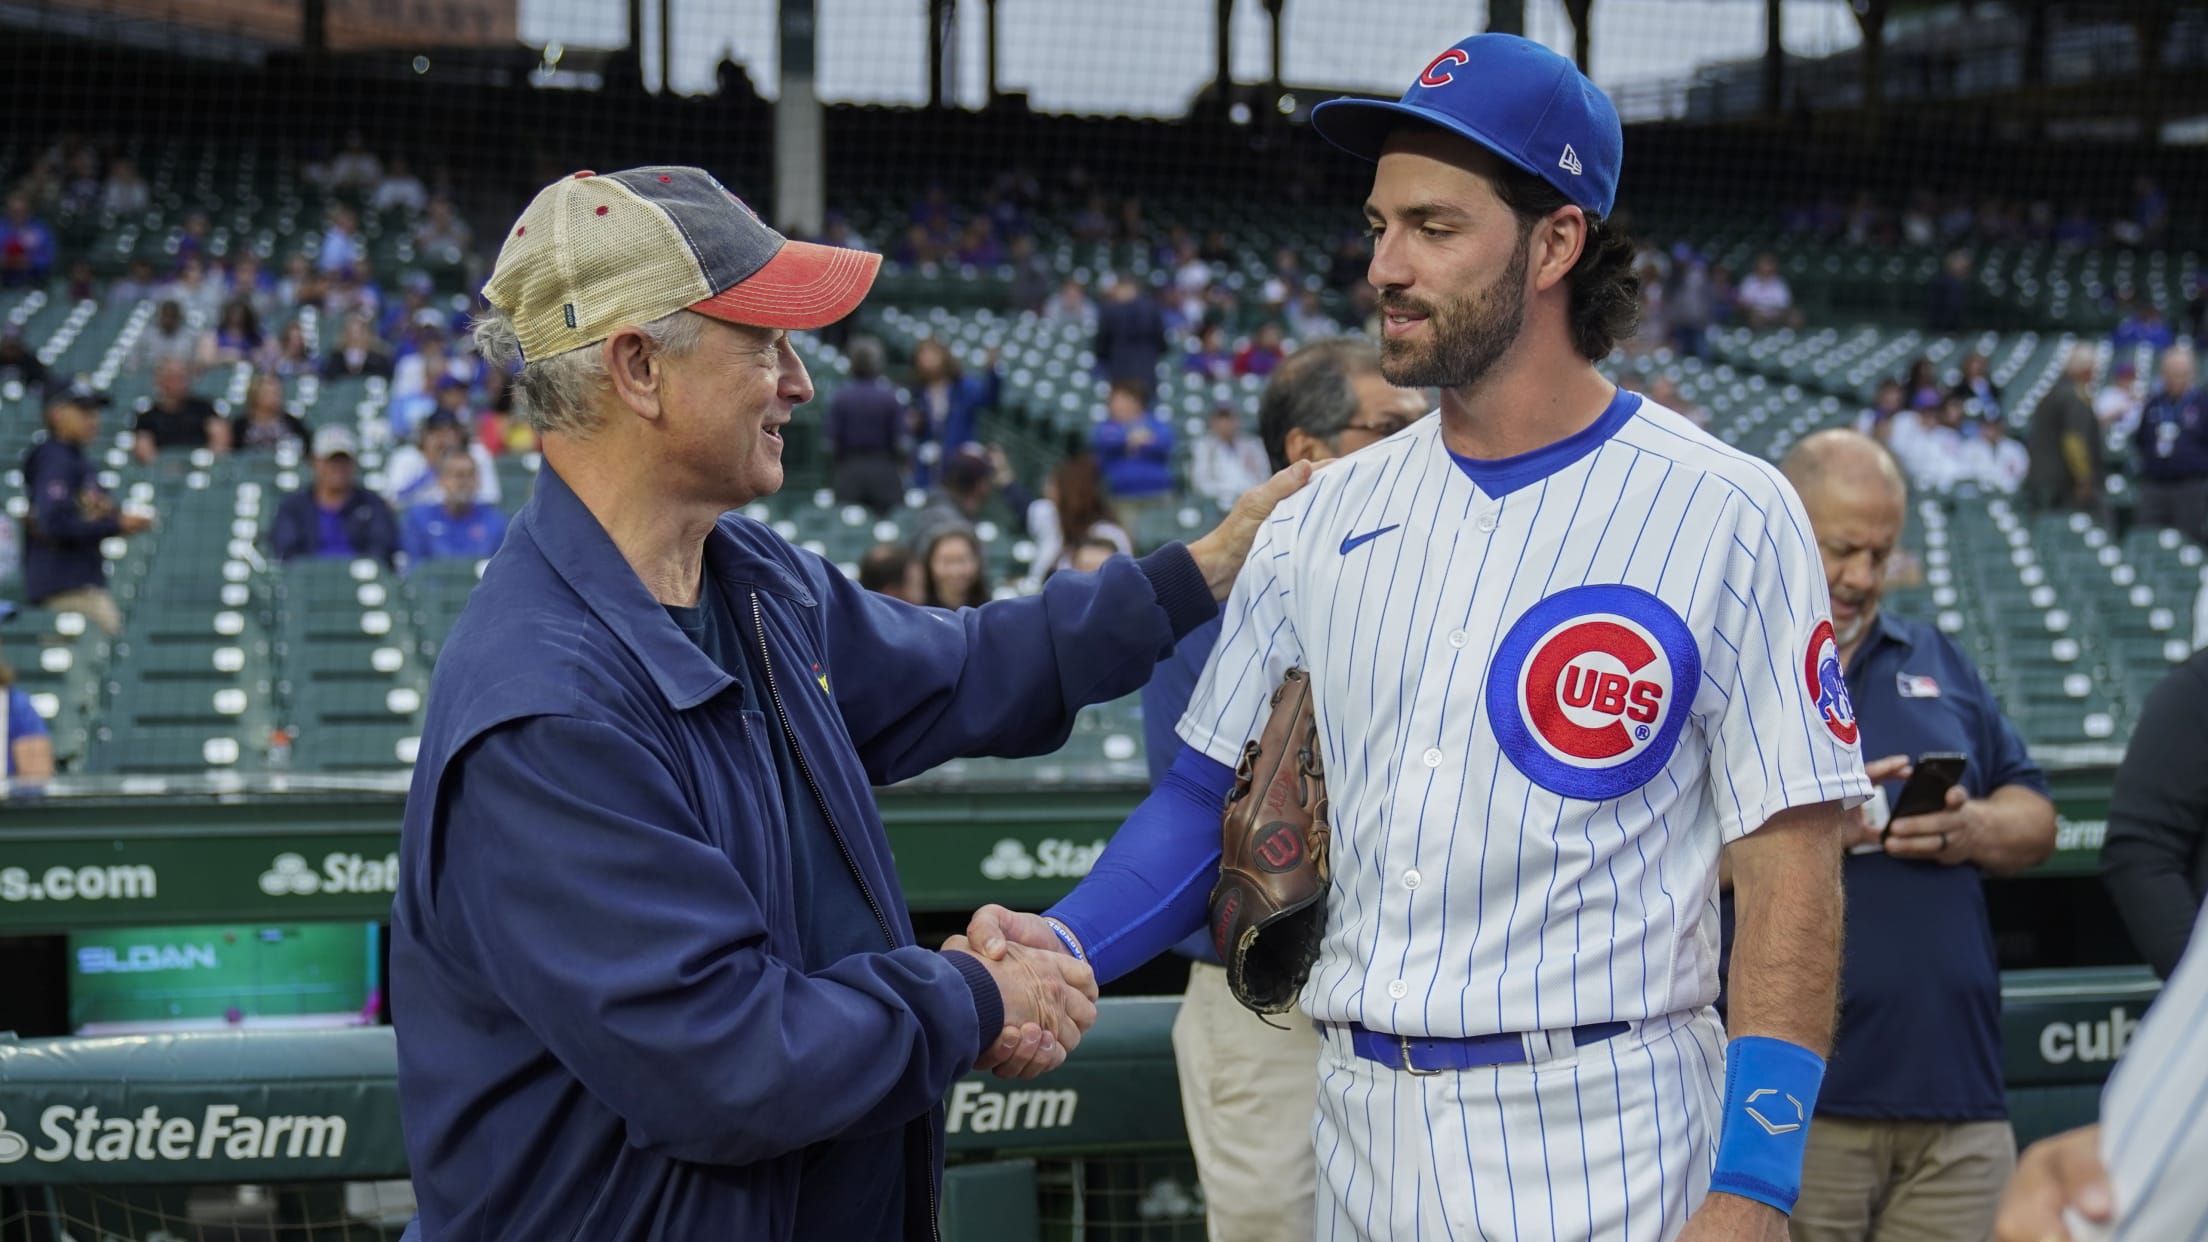 Actor Gary Sinise shakes hands with Cubs shortstop Dansby Swanson on the field before a game